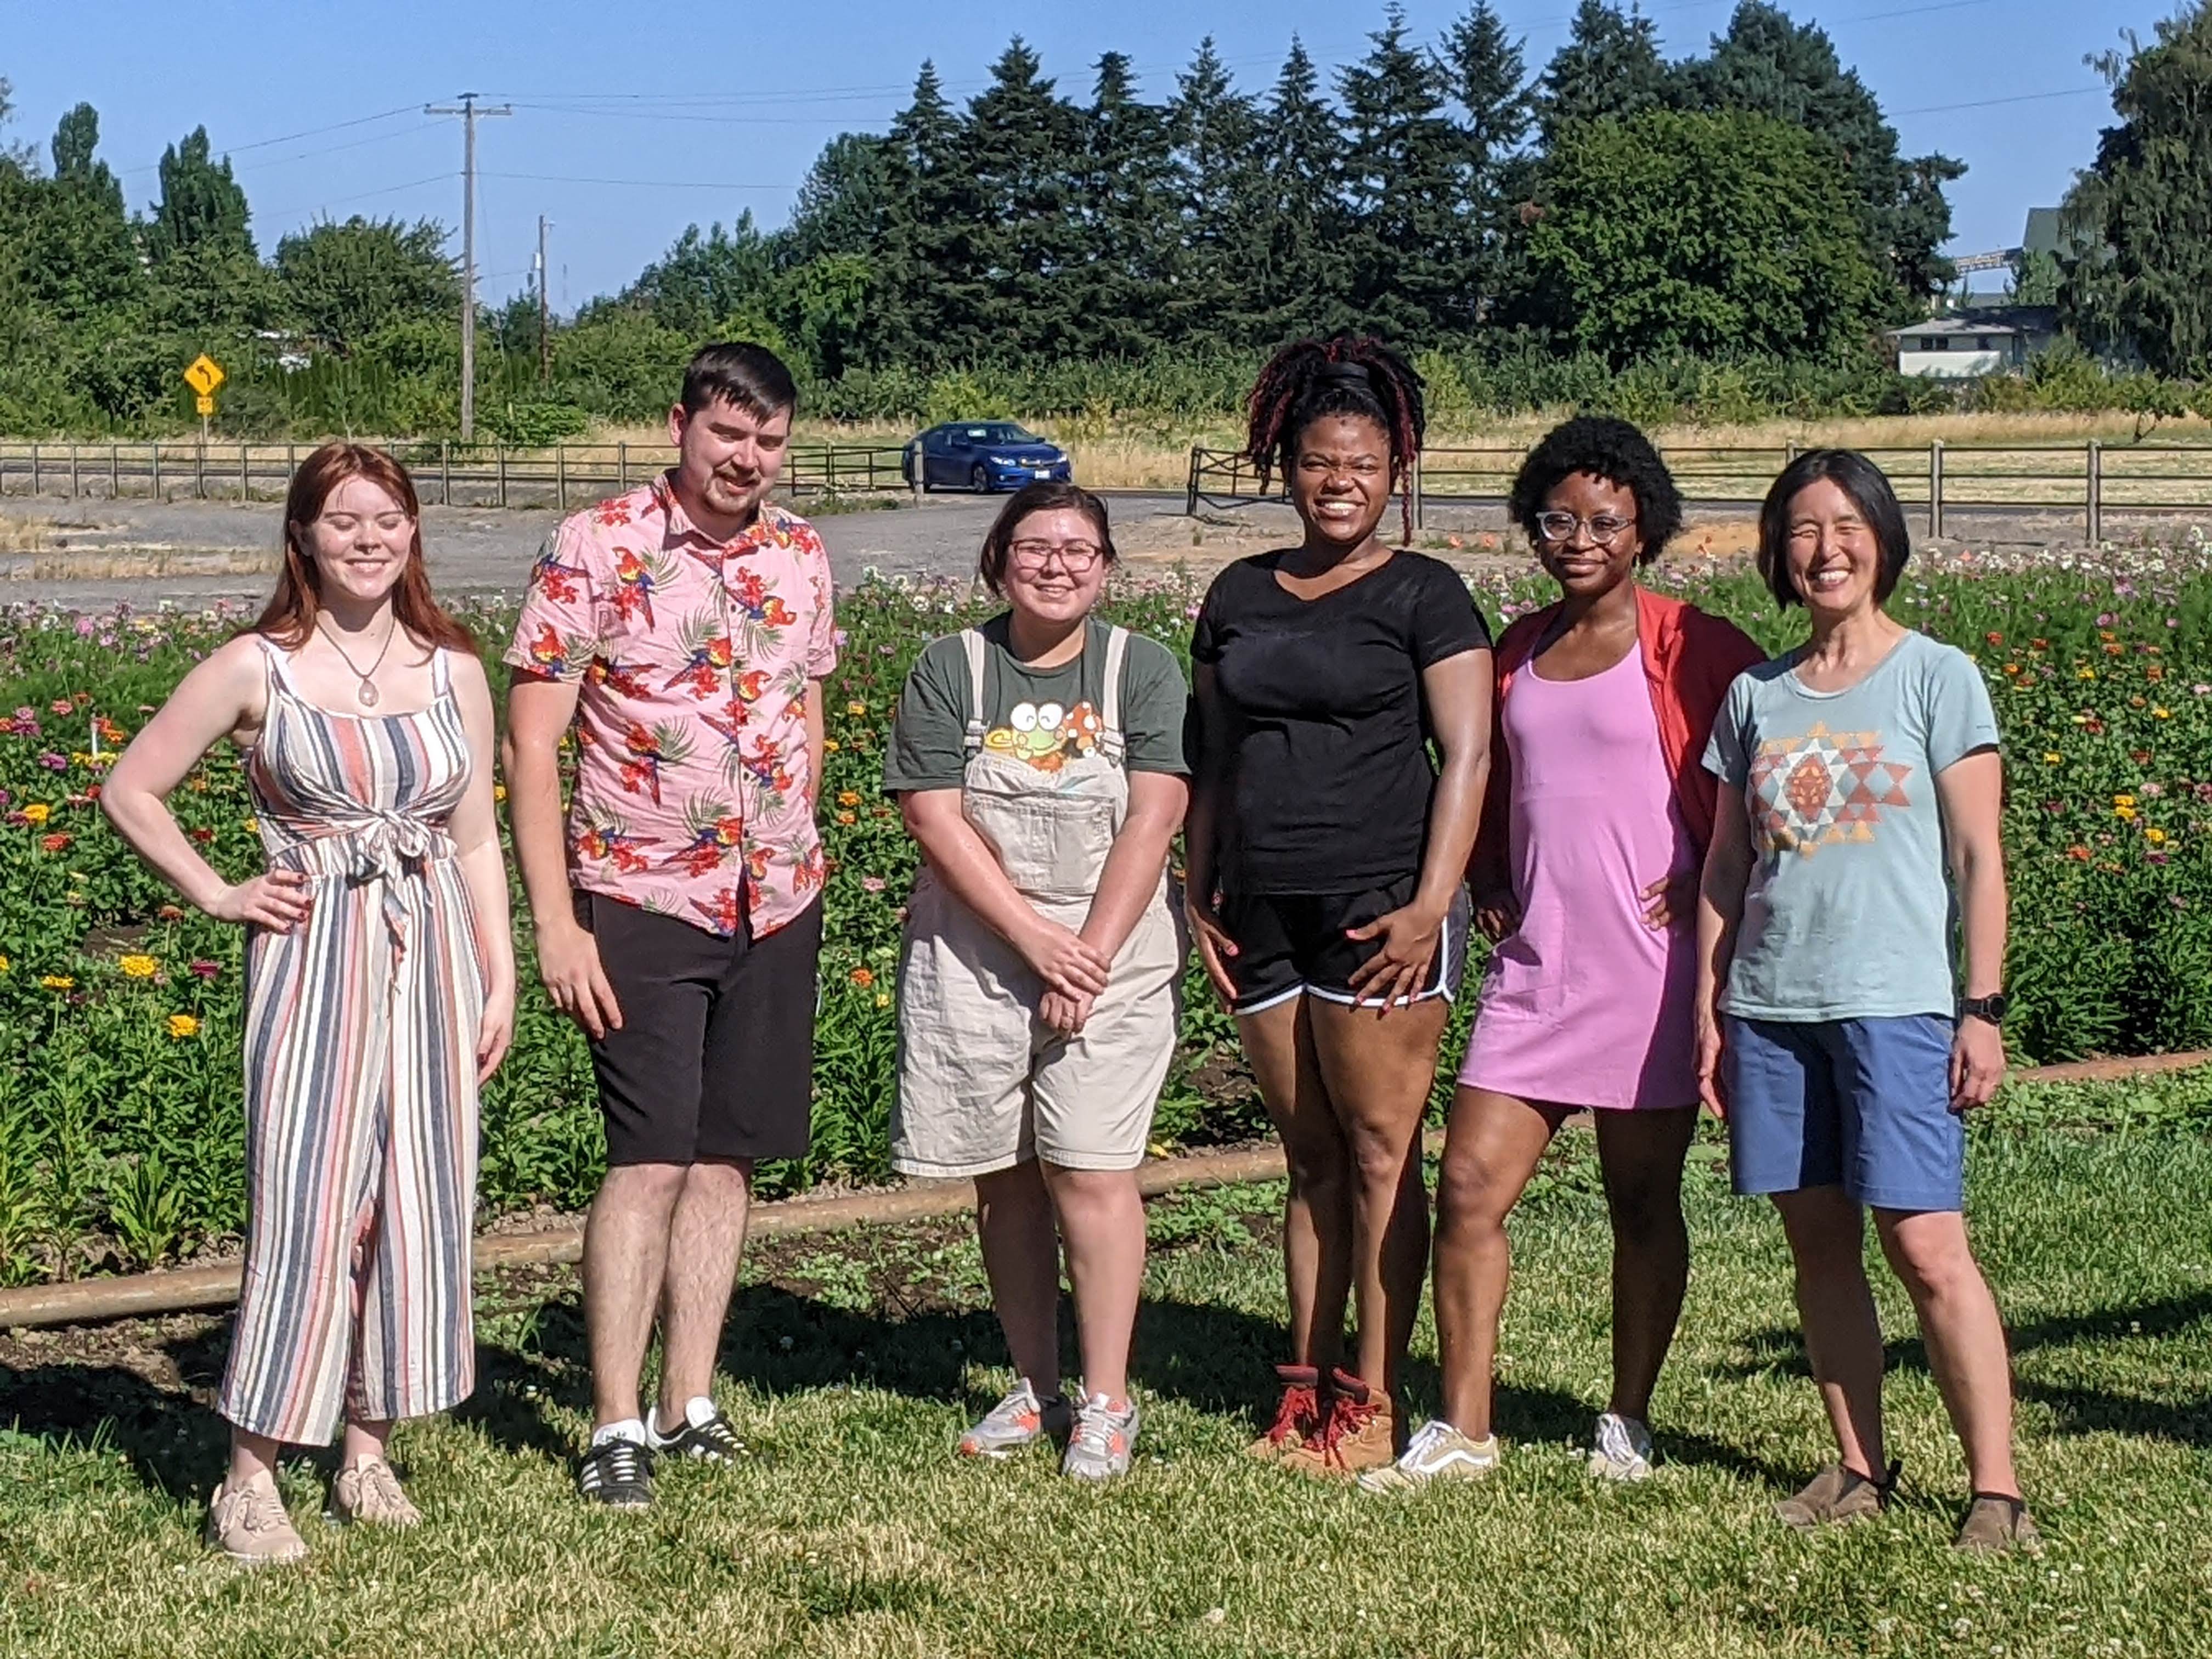 Lab berry picking outing at Sauvie Island Farms.  From left: Nicole Dean, Jordan Hill, Briana Martinez, Courtney Austin, Michela Mondesir, Lina Reiss